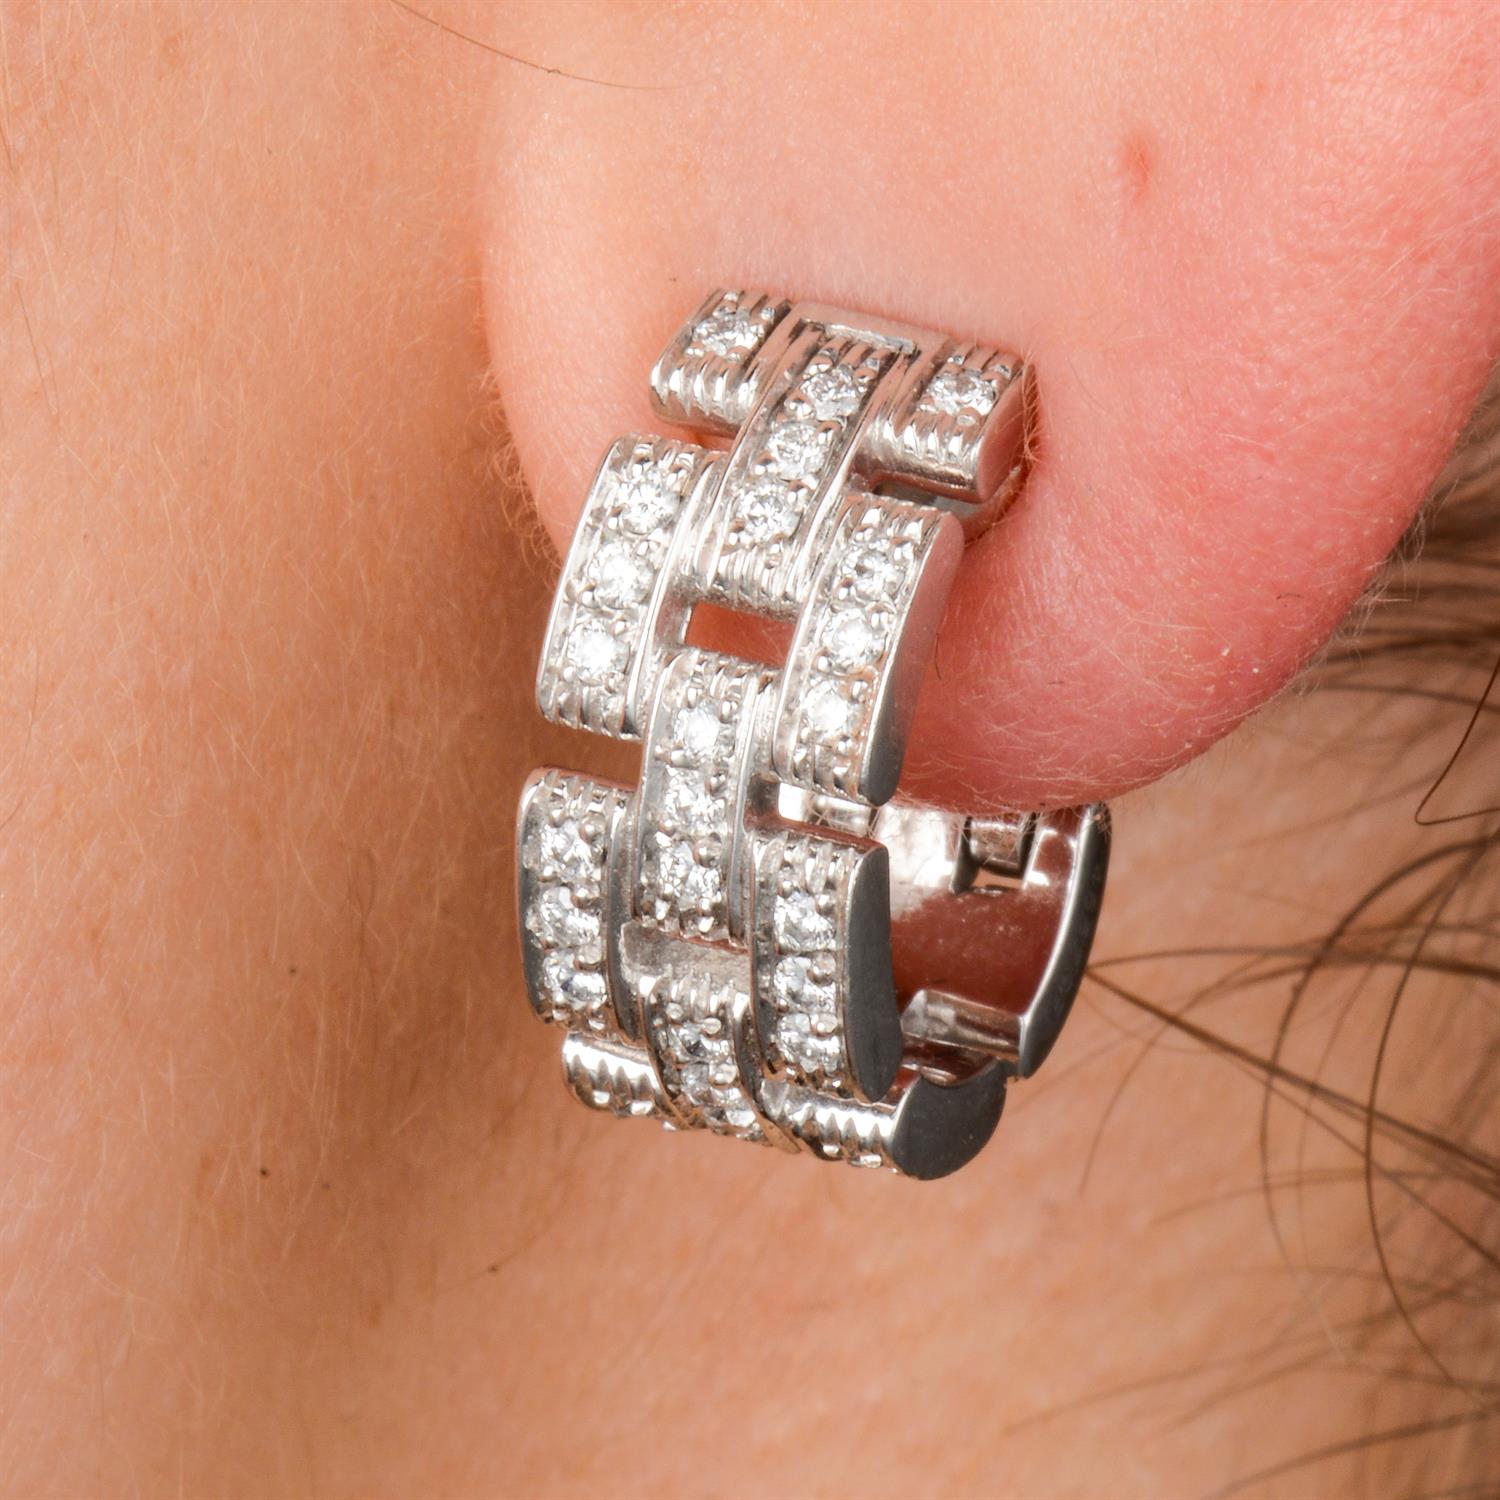 Diamond 'Maillon Panthère' earrings, by Cartier